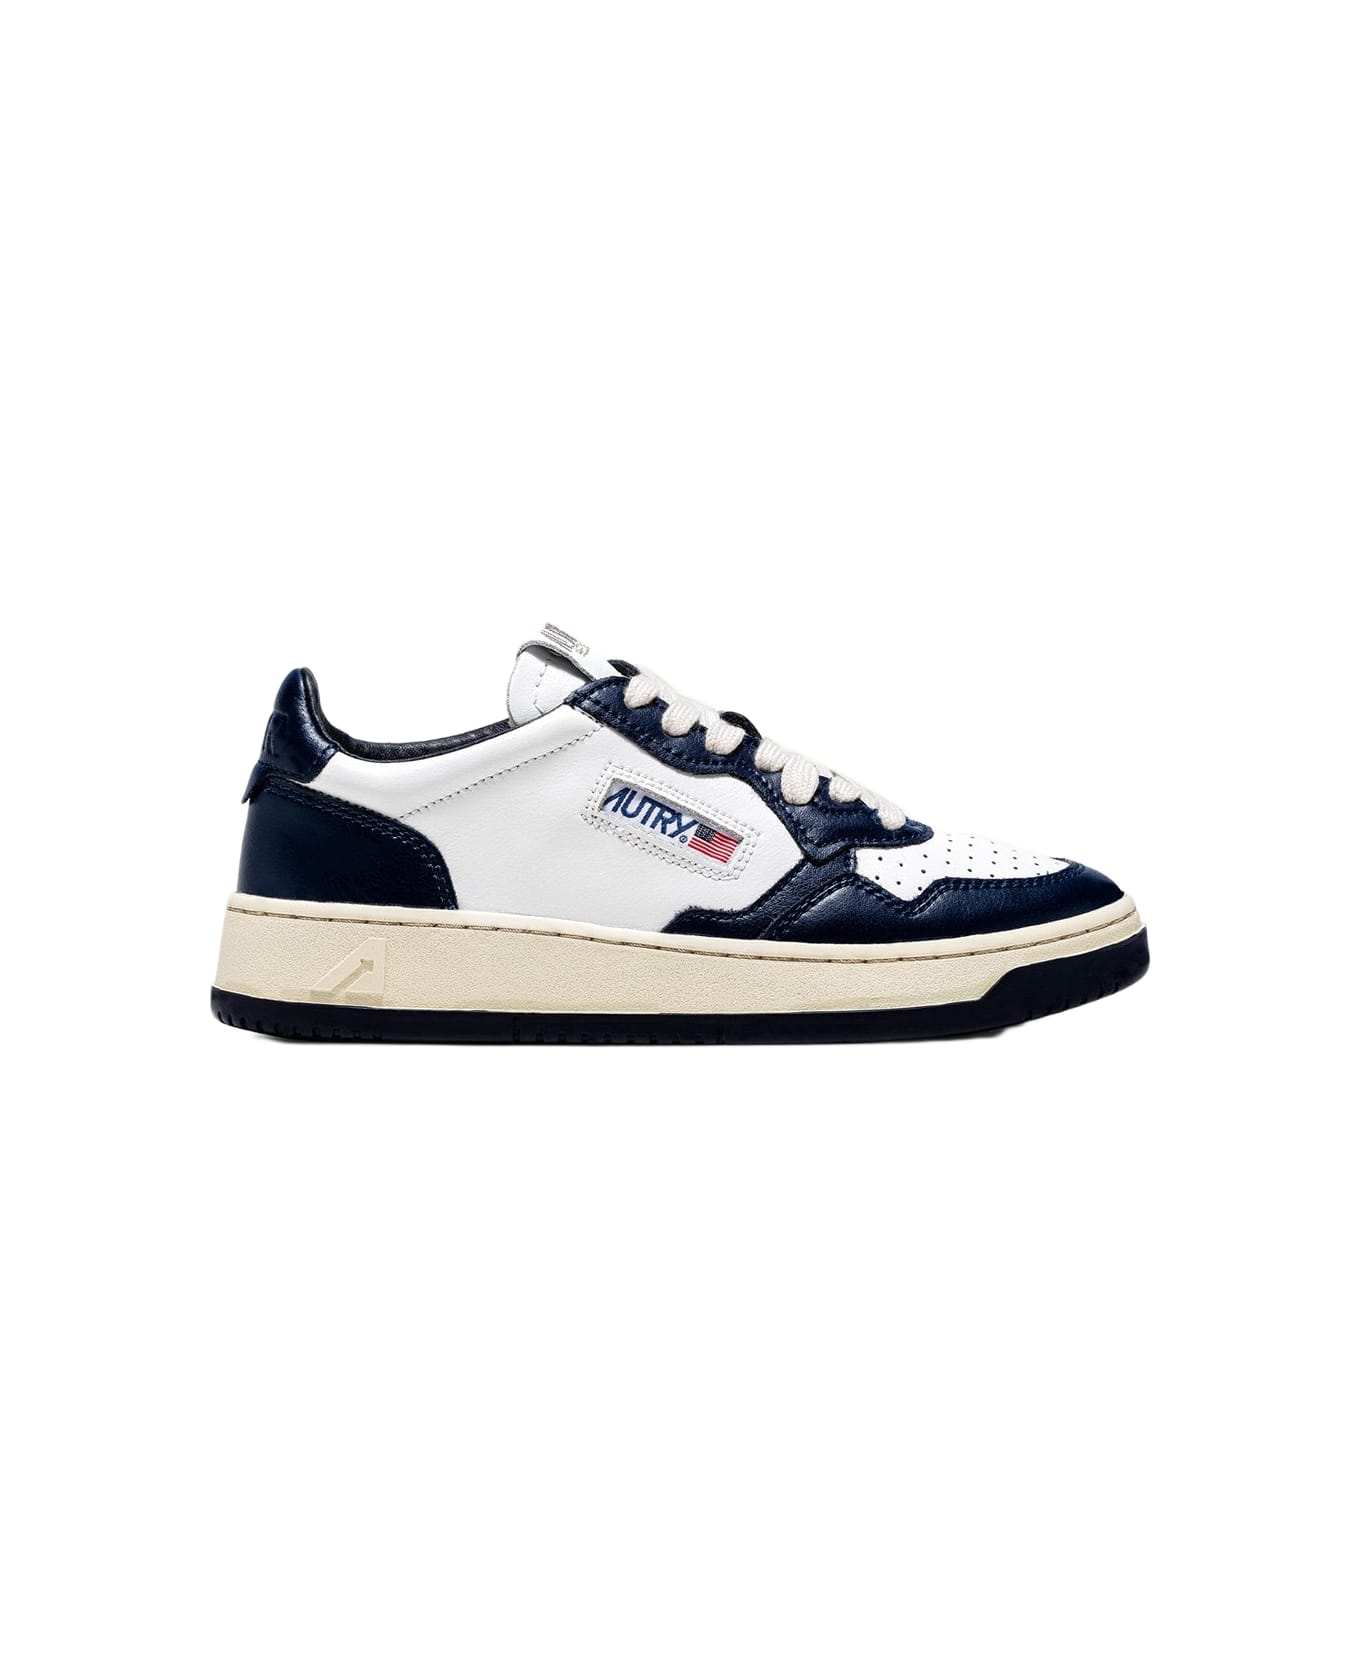 Autry Medalist Low Leather Sneakers - Wht/blue スニーカー